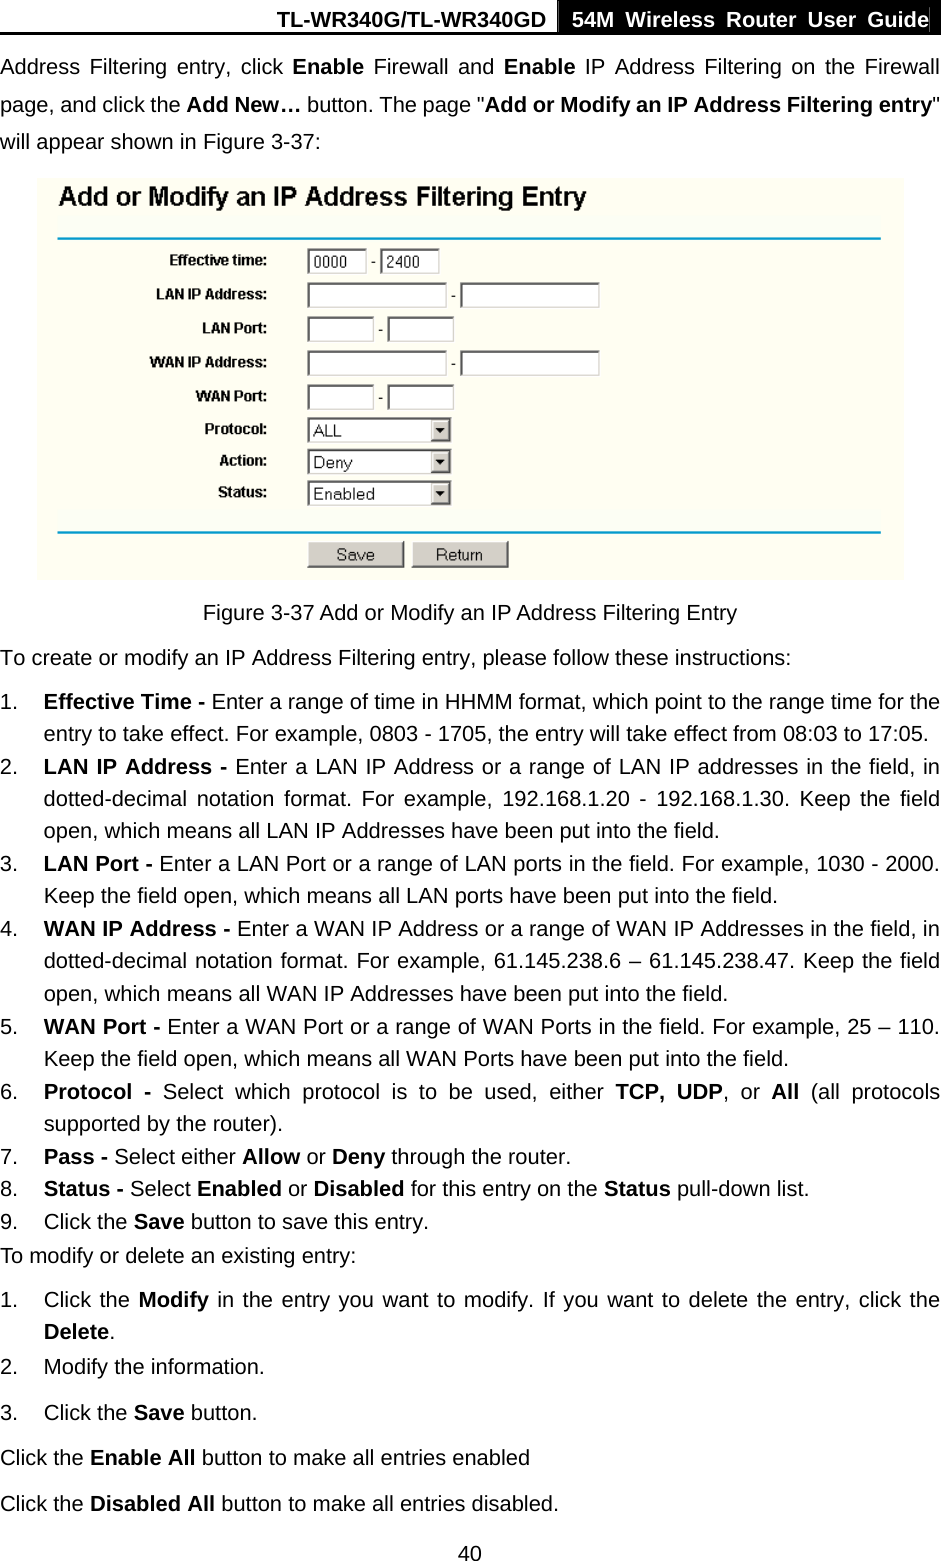 TL-WR340G/TL-WR340GD 54M Wireless Router User Guide  40Address Filtering entry, click Enable Firewall and Enable IP Address Filtering on the Firewall page, and click the Add New… button. The page &quot;Add or Modify an IP Address Filtering entry&quot; will appear shown in Figure 3-37:  Figure 3-37 Add or Modify an IP Address Filtering Entry To create or modify an IP Address Filtering entry, please follow these instructions: 1.  Effective Time - Enter a range of time in HHMM format, which point to the range time for the entry to take effect. For example, 0803 - 1705, the entry will take effect from 08:03 to 17:05. 2.  LAN IP Address - Enter a LAN IP Address or a range of LAN IP addresses in the field, in dotted-decimal notation format. For example, 192.168.1.20 - 192.168.1.30. Keep the field open, which means all LAN IP Addresses have been put into the field.   3.  LAN Port - Enter a LAN Port or a range of LAN ports in the field. For example, 1030 - 2000. Keep the field open, which means all LAN ports have been put into the field.   4.  WAN IP Address - Enter a WAN IP Address or a range of WAN IP Addresses in the field, in dotted-decimal notation format. For example, 61.145.238.6 – 61.145.238.47. Keep the field open, which means all WAN IP Addresses have been put into the field.   5.  WAN Port - Enter a WAN Port or a range of WAN Ports in the field. For example, 25 – 110. Keep the field open, which means all WAN Ports have been put into the field.   6.  Protocol - Select which protocol is to be used, either TCP, UDP, or All  (all protocols supported by the router). 7.  Pass - Select either Allow or Deny through the router. 8.  Status - Select Enabled or Disabled for this entry on the Status pull-down list. 9. Click the Save button to save this entry. To modify or delete an existing entry: 1. Click the Modify in the entry you want to modify. If you want to delete the entry, click the Delete. 2.  Modify the information.   3. Click the Save button. Click the Enable All button to make all entries enabled Click the Disabled All button to make all entries disabled. 